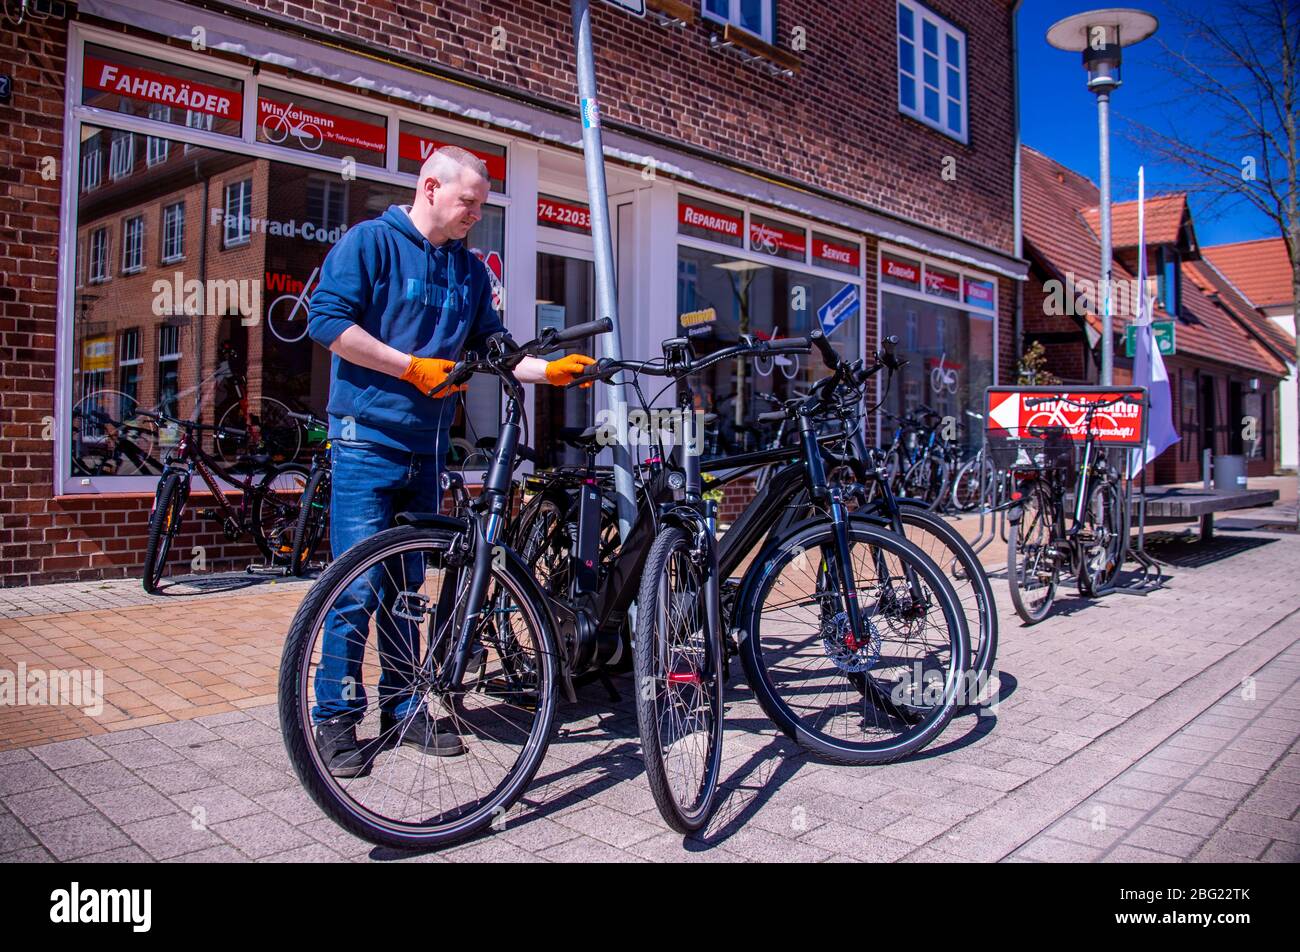 Bicycle Shops In Germany High Resolution Stock Photography and Images -  Alamy